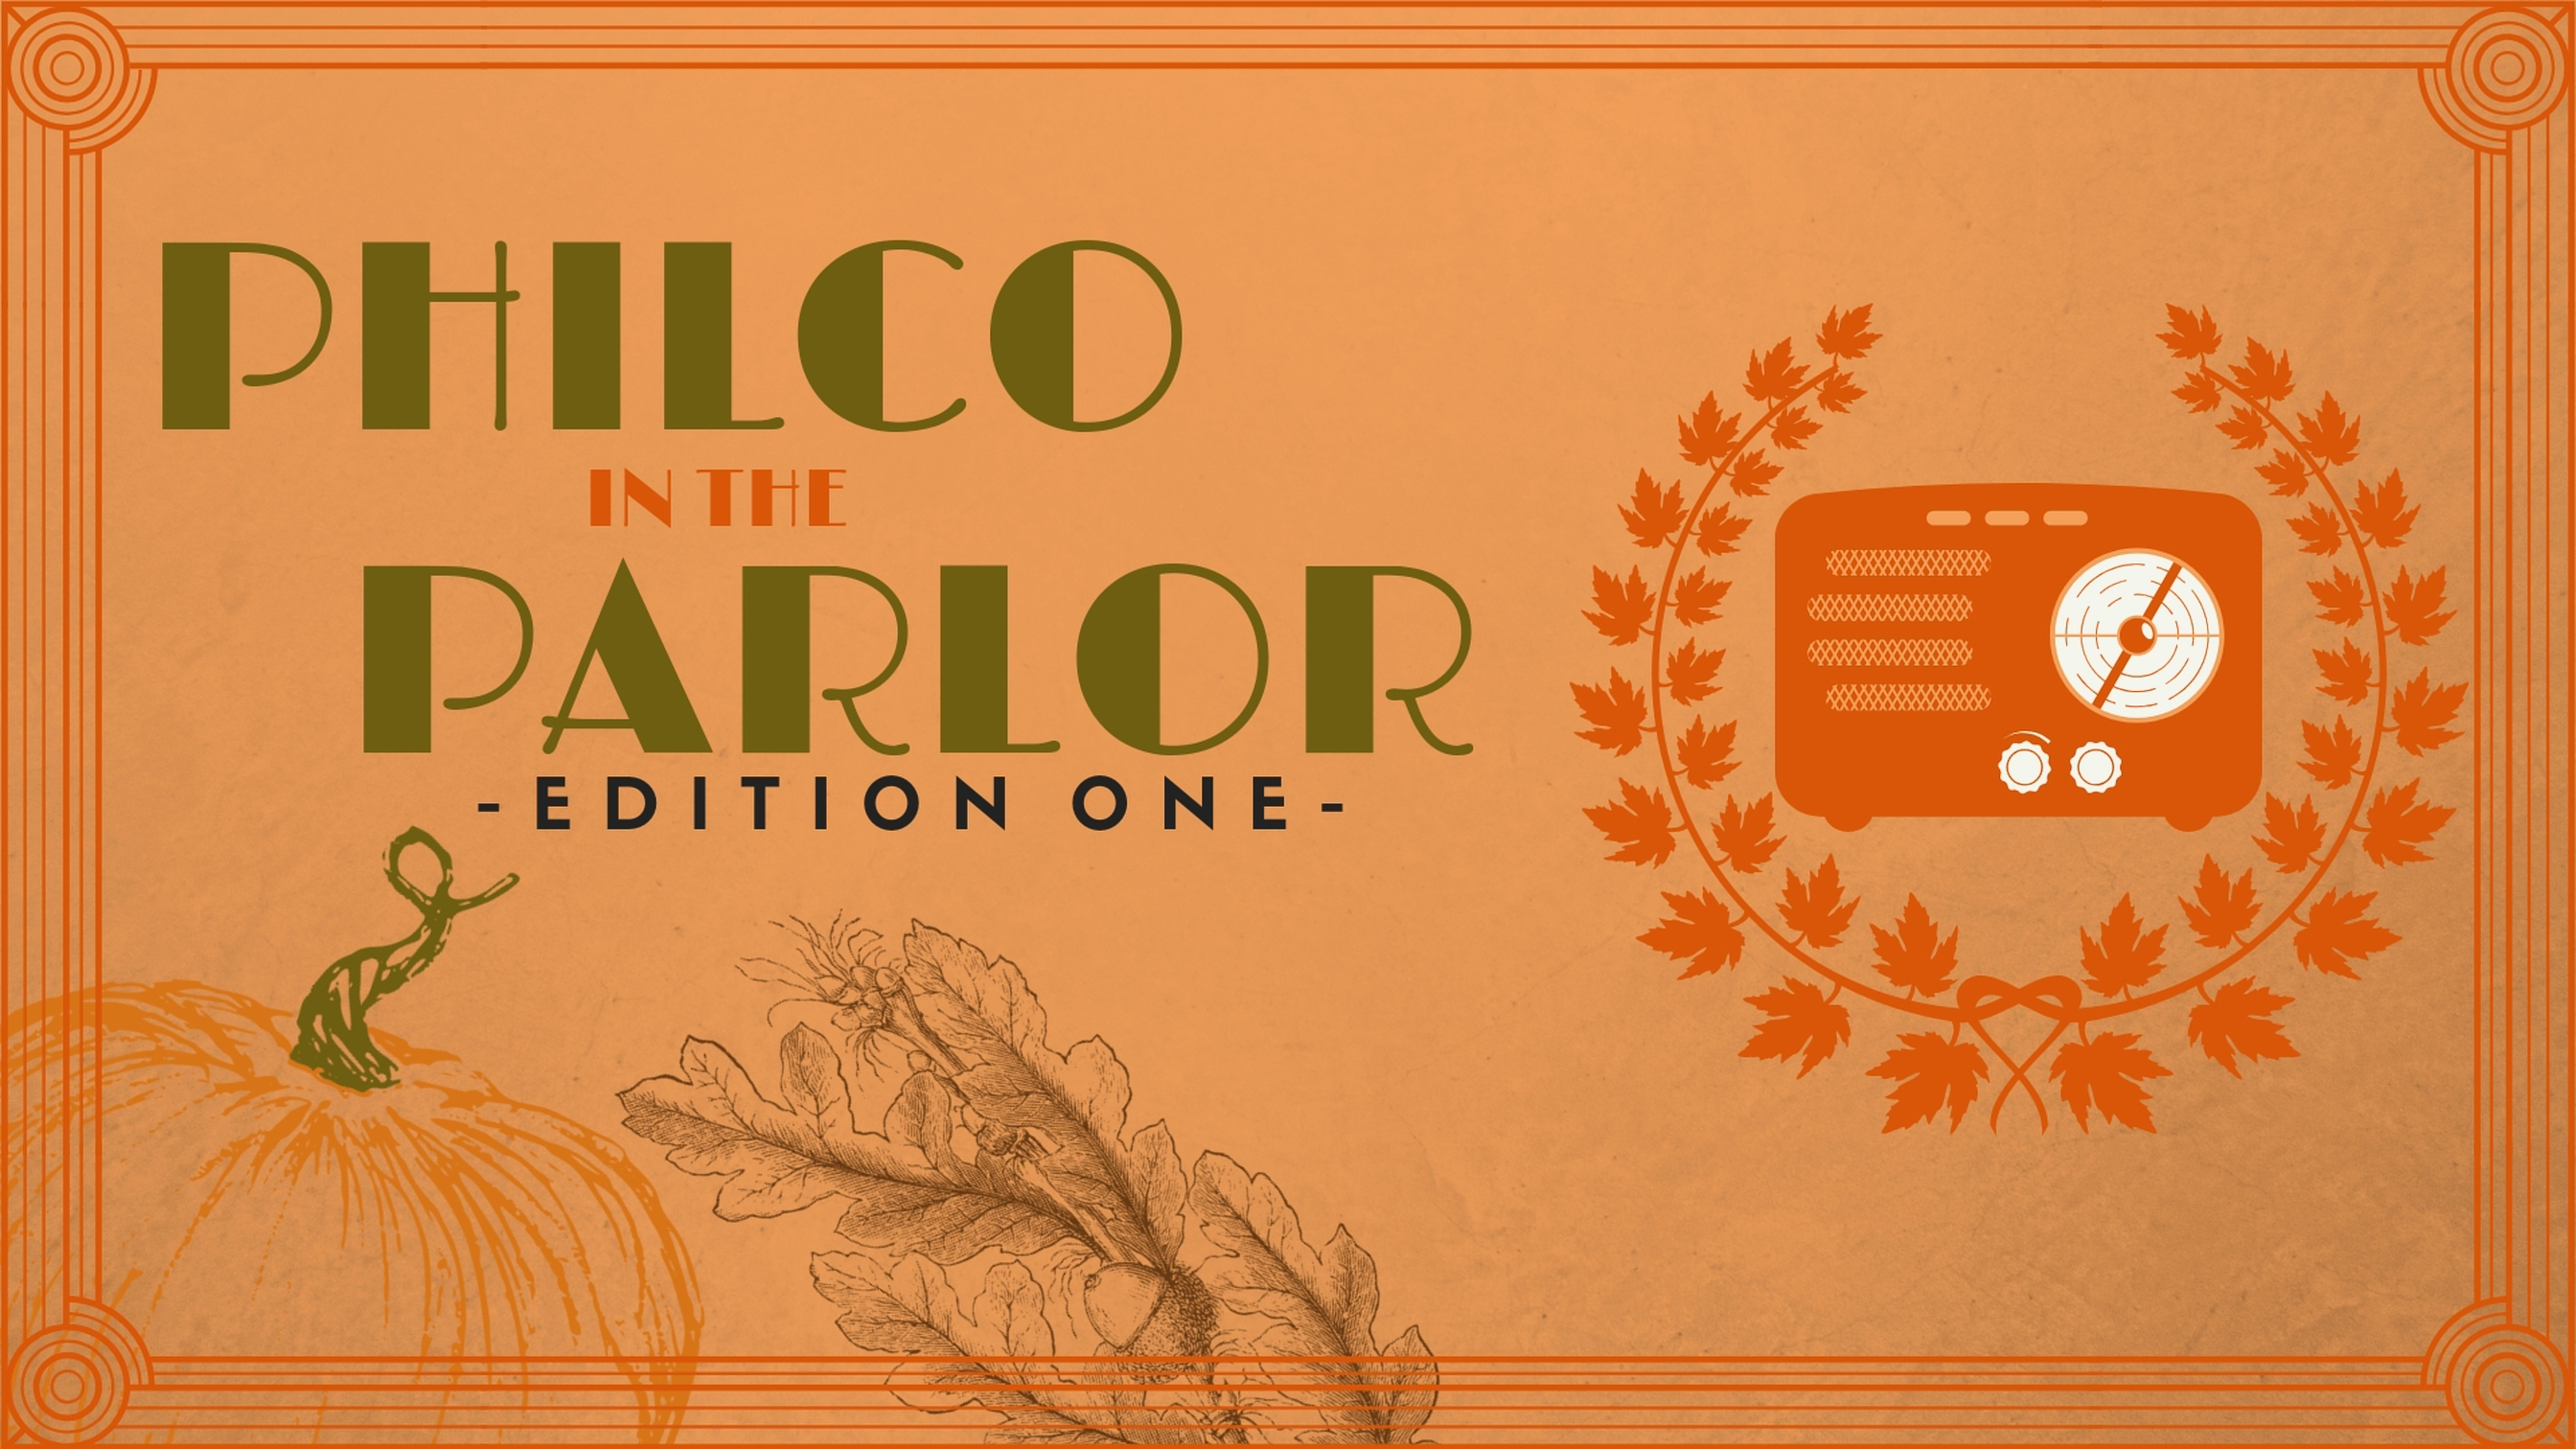 Banner reading "Philco in the Parlor: Episode 1" featuring autumn imagery pumpkins, leaves, etc.) and an old-timey radio.